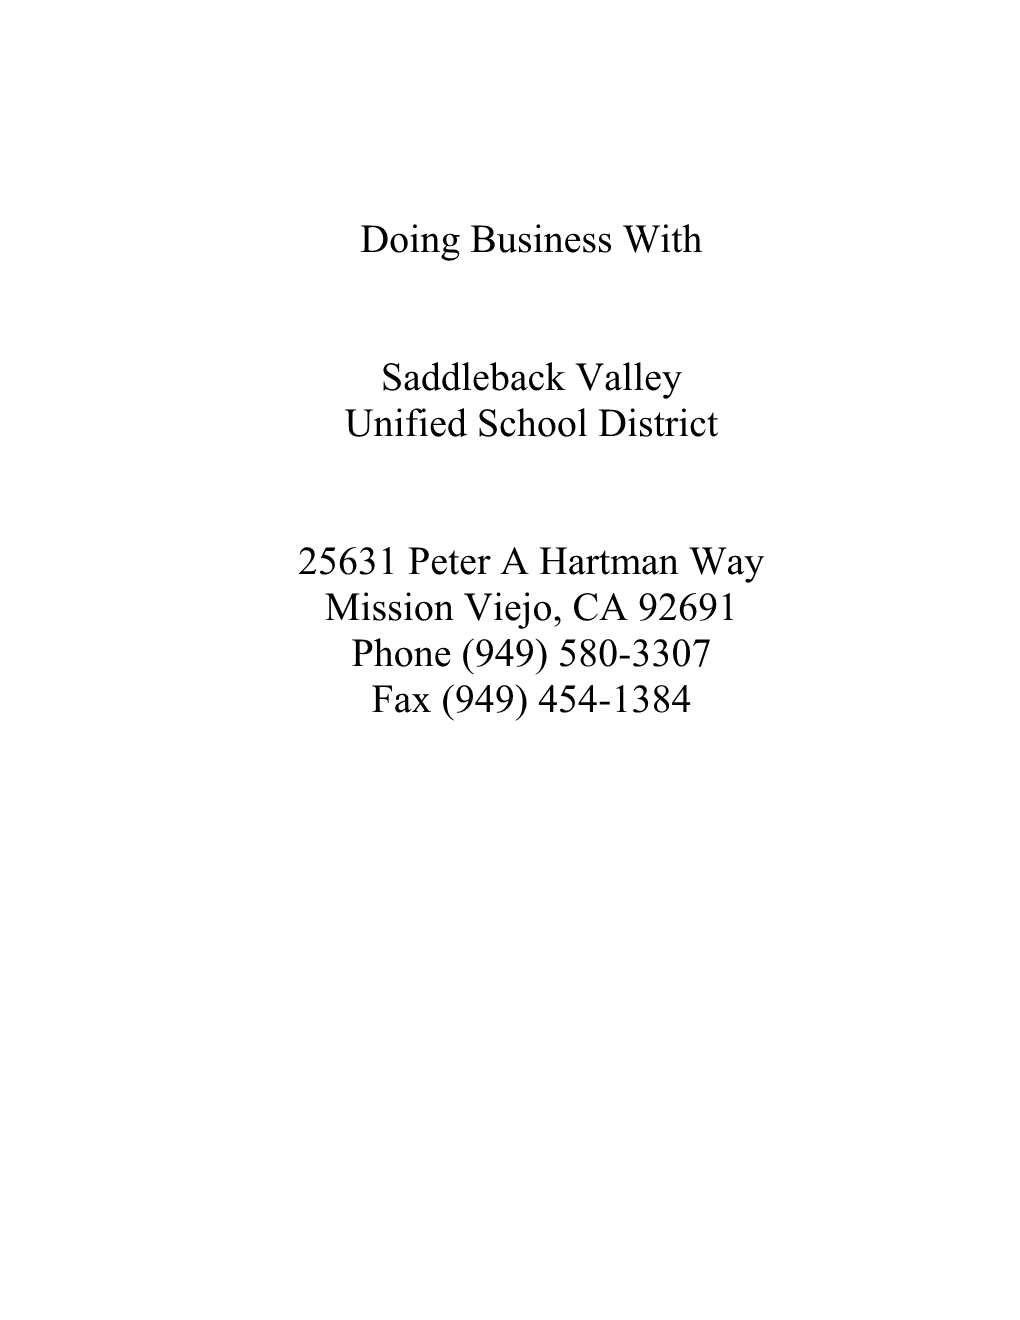 Doing Business with Saddleback Valley Unified School District 25631